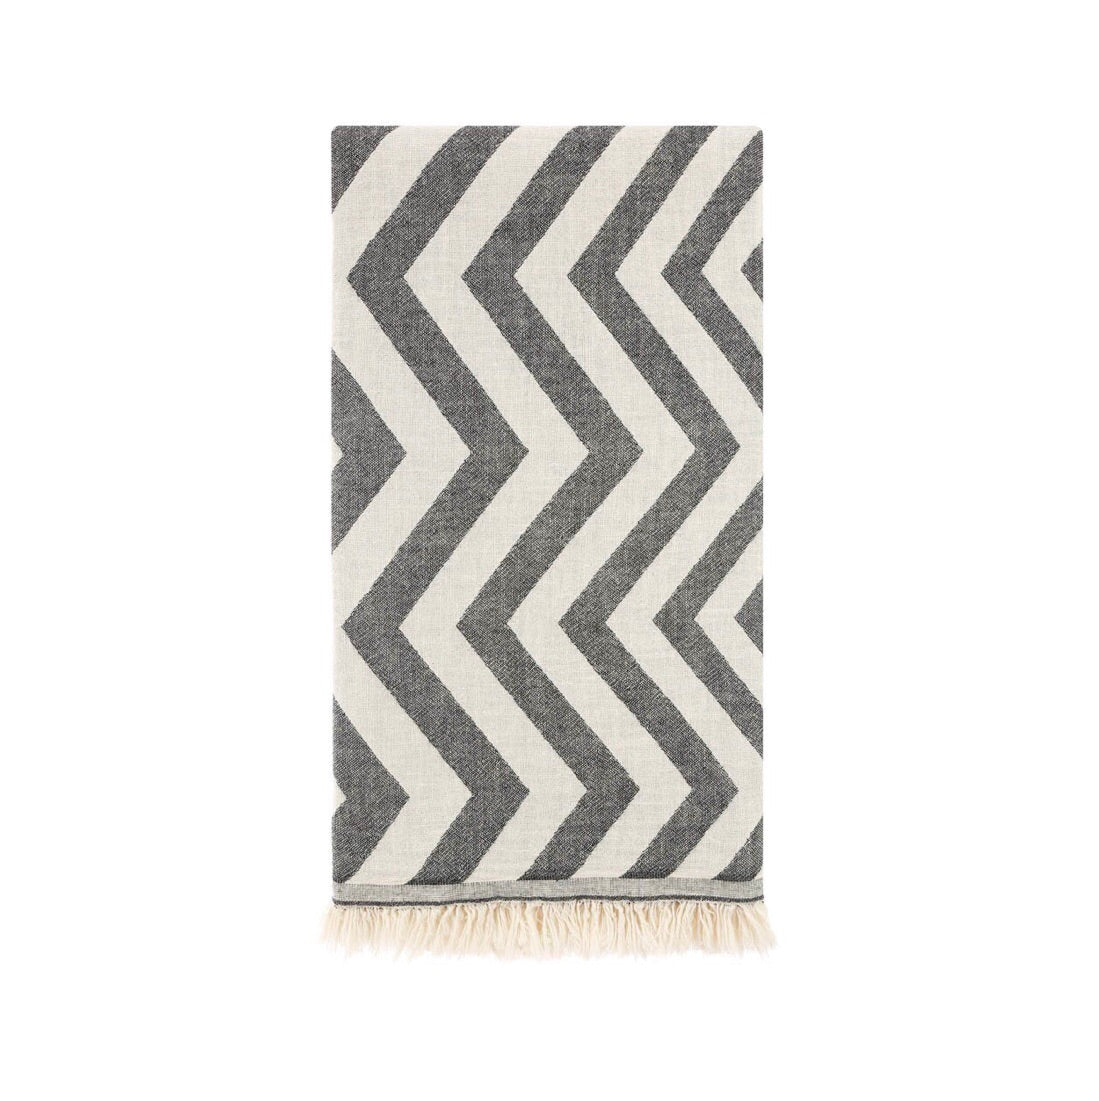 This beautiful chevron patterned towel is hand loomed from 100% Turkish Cotton.  It is the traditional flat-woven towels that was used in the legendary Turkish bath.  Known for its softness, absorbency, quick dry, light weight, hypoallergenic, and antibacterial properties.  Perfect for everyday use after a bath, at the beach, pool, or picnic.  Can also be tied around and worn like a sarong, shawl, or scarf!  It folds up small making them perfect for travel. 